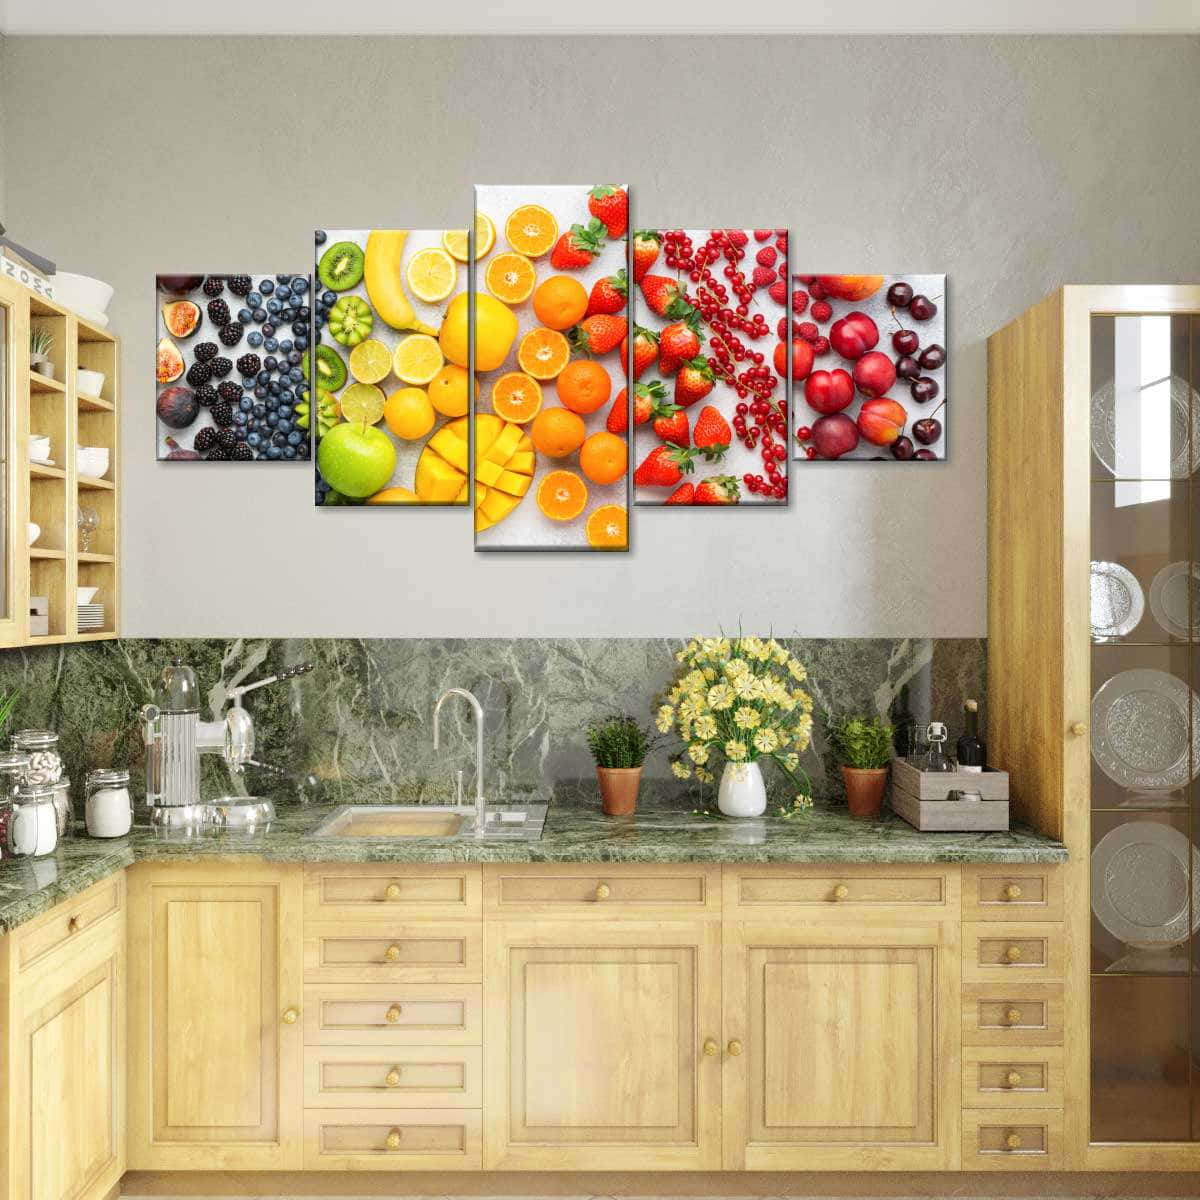 A Kitchen With A Lot Of Fruit On The Counter